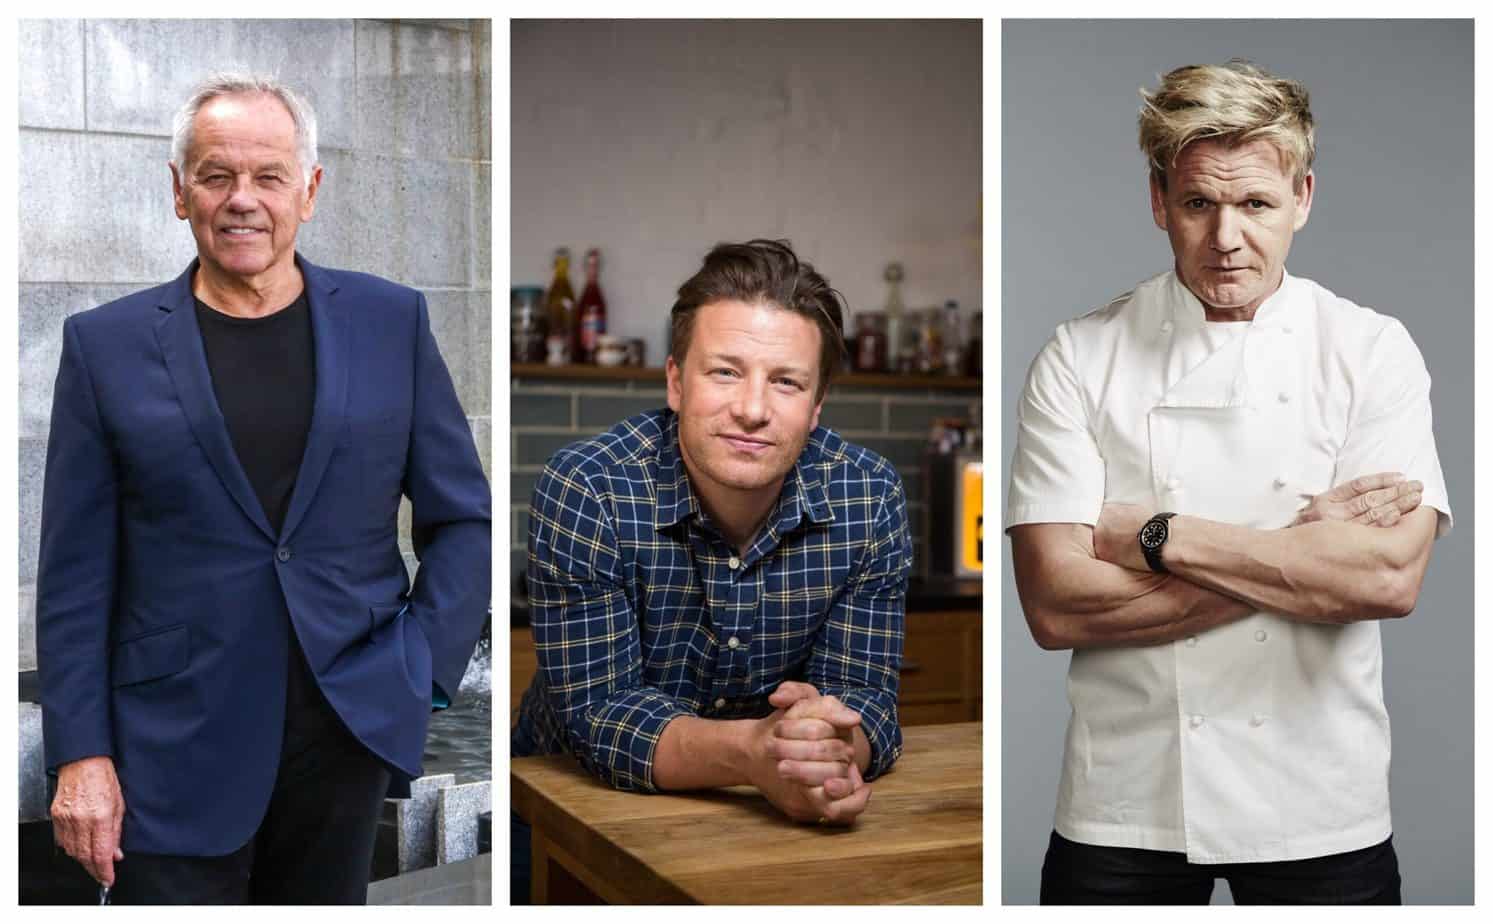 The 25 Richest Celebrity Chefs in the World